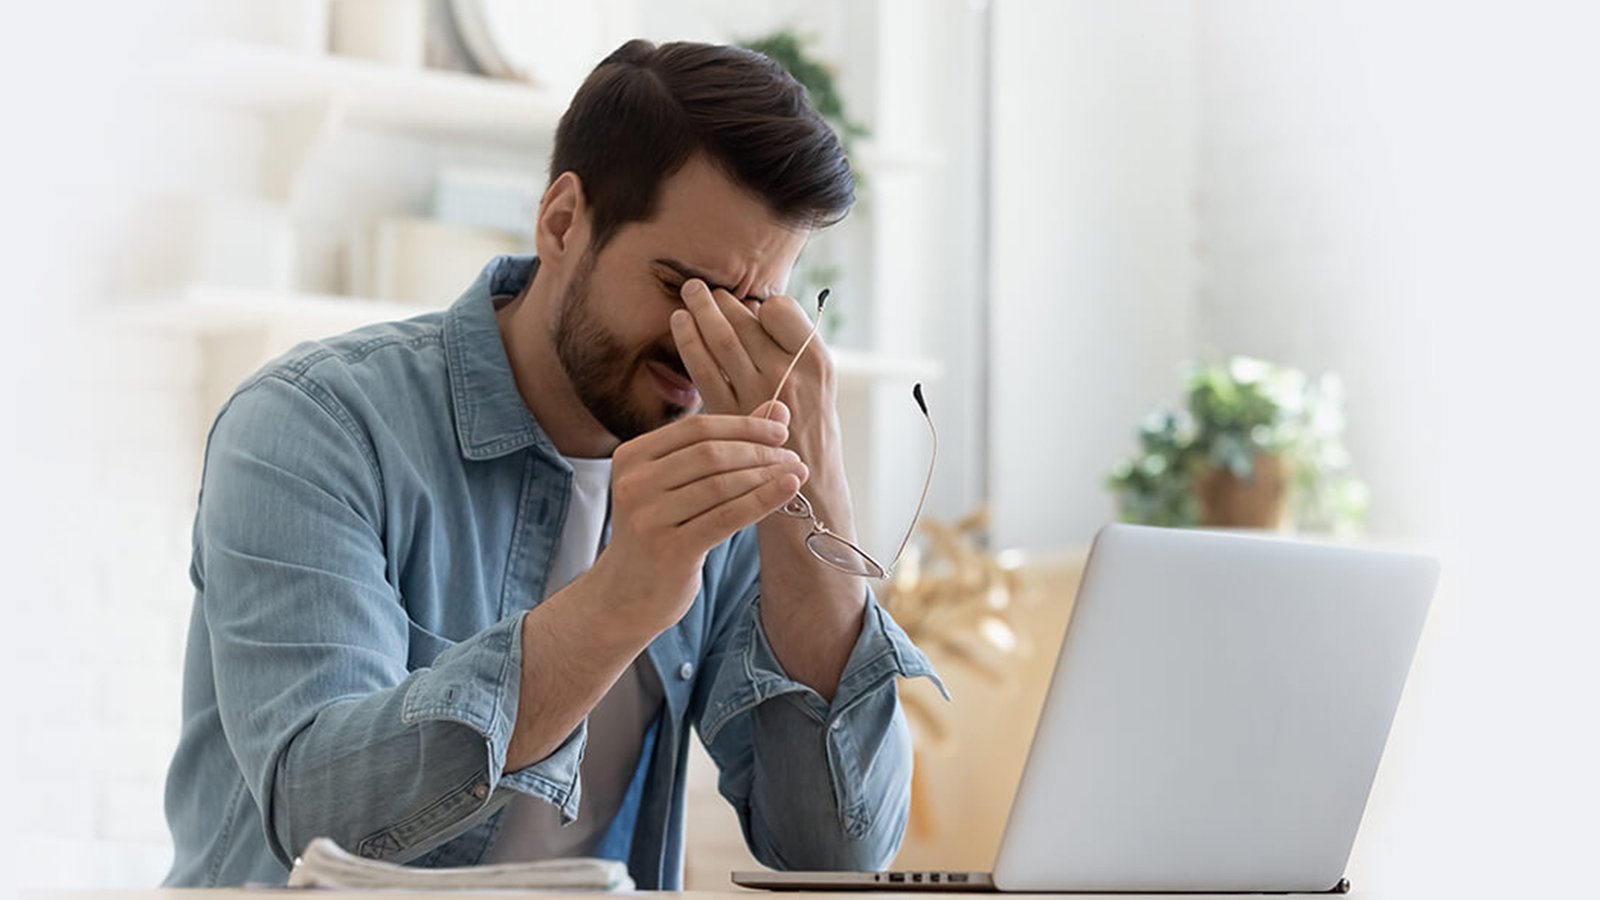 How to prevent eye strain when using a computer?